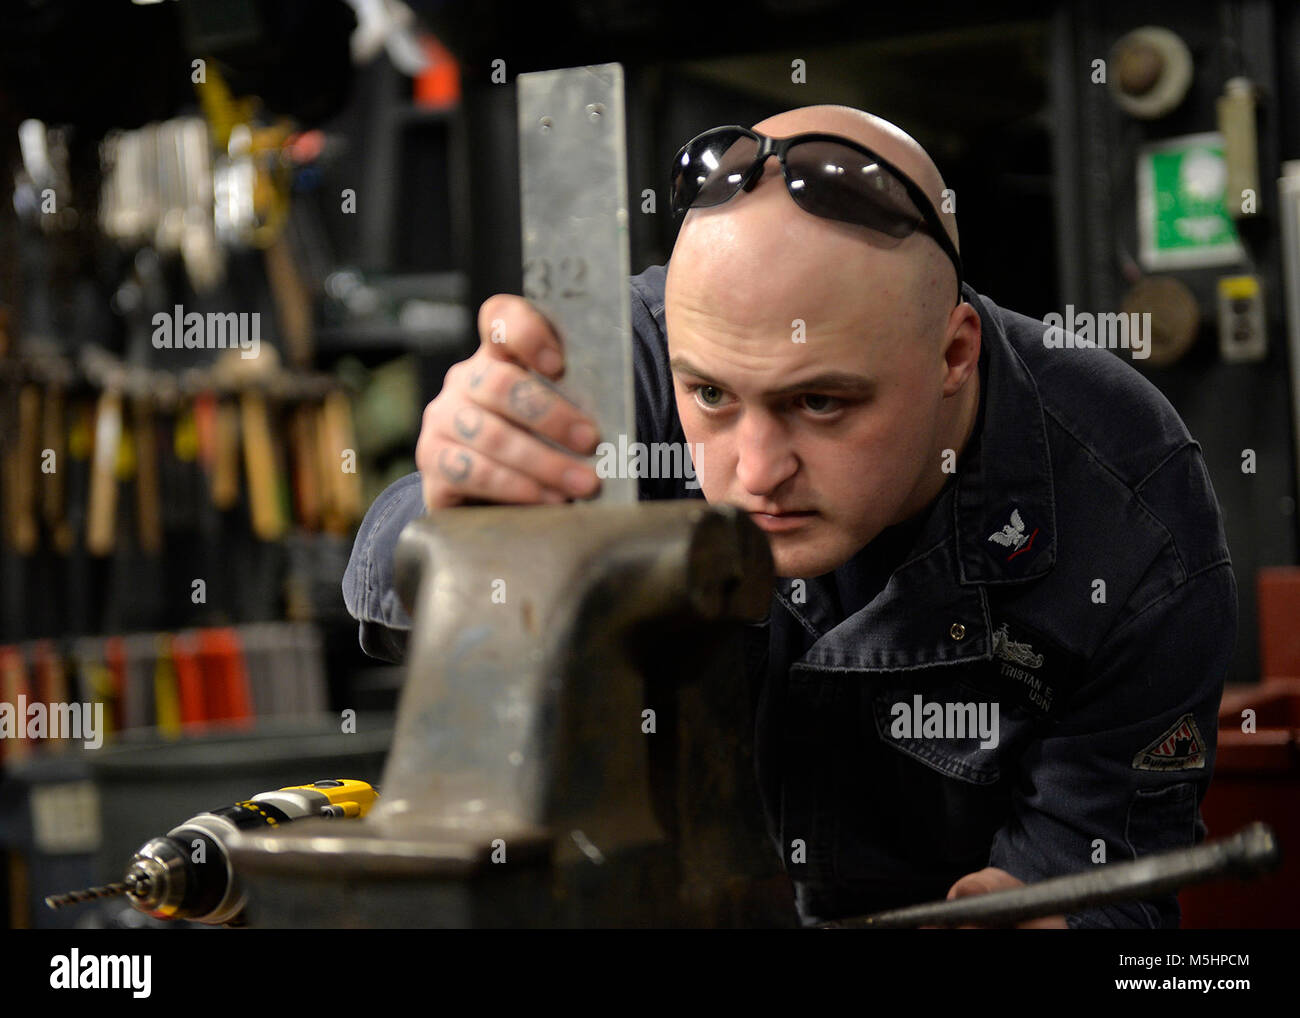 YOKOSUKA, Japan (Feb. 12, 2018) - Hull Maintenance Technician 3rd Class Tristan E. Daugherty, assigned to the U.S. 7th Fleet flagship USS Blue Ridge (LCC 19), constructs brackets to secure for sea. Blue Ridge is in an extensive maintenance period in order to modernize the ship to continue to serve as a robust communications platform in the U.S. 7th Fleet area of operations. (U.S. Navy Stock Photo